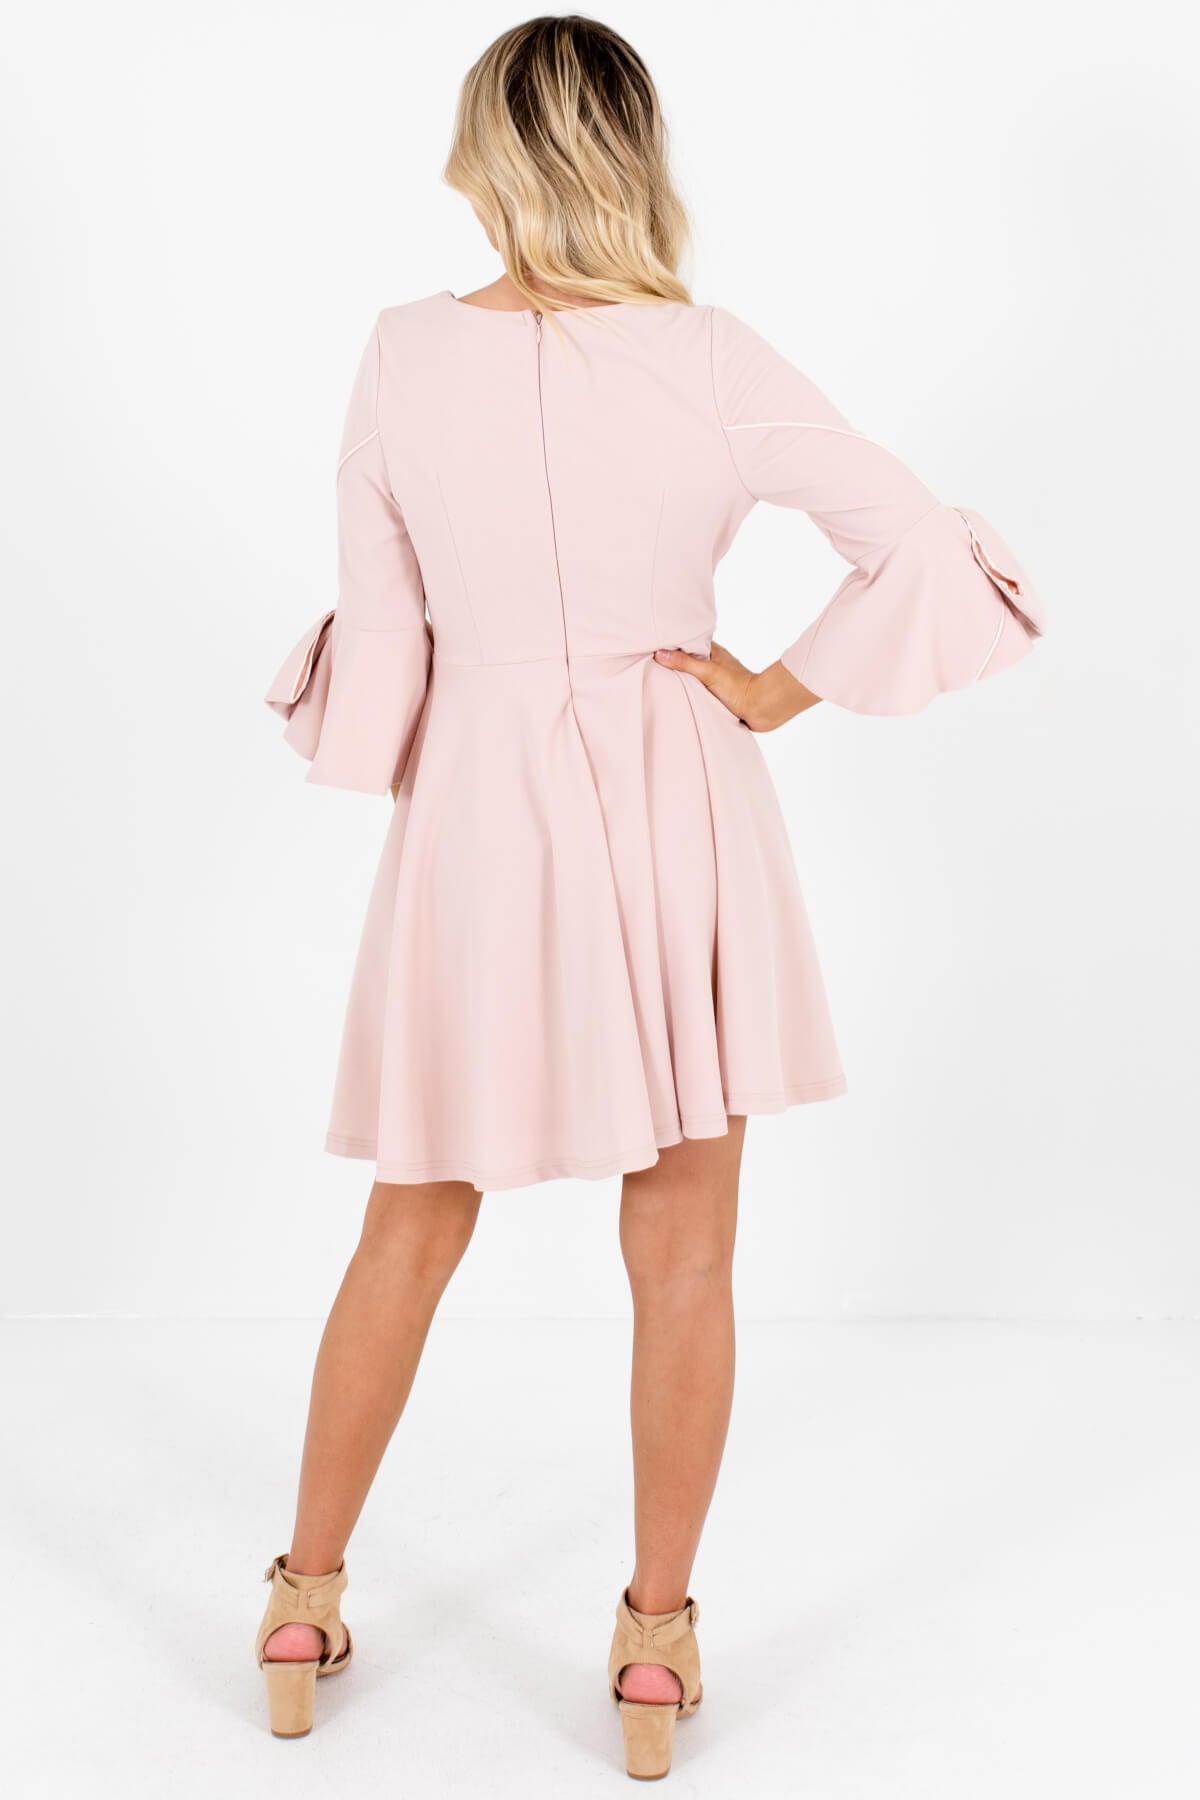 Blush Pink Flare Bow Sleeve Mini Dresses Affordable Online Boutique